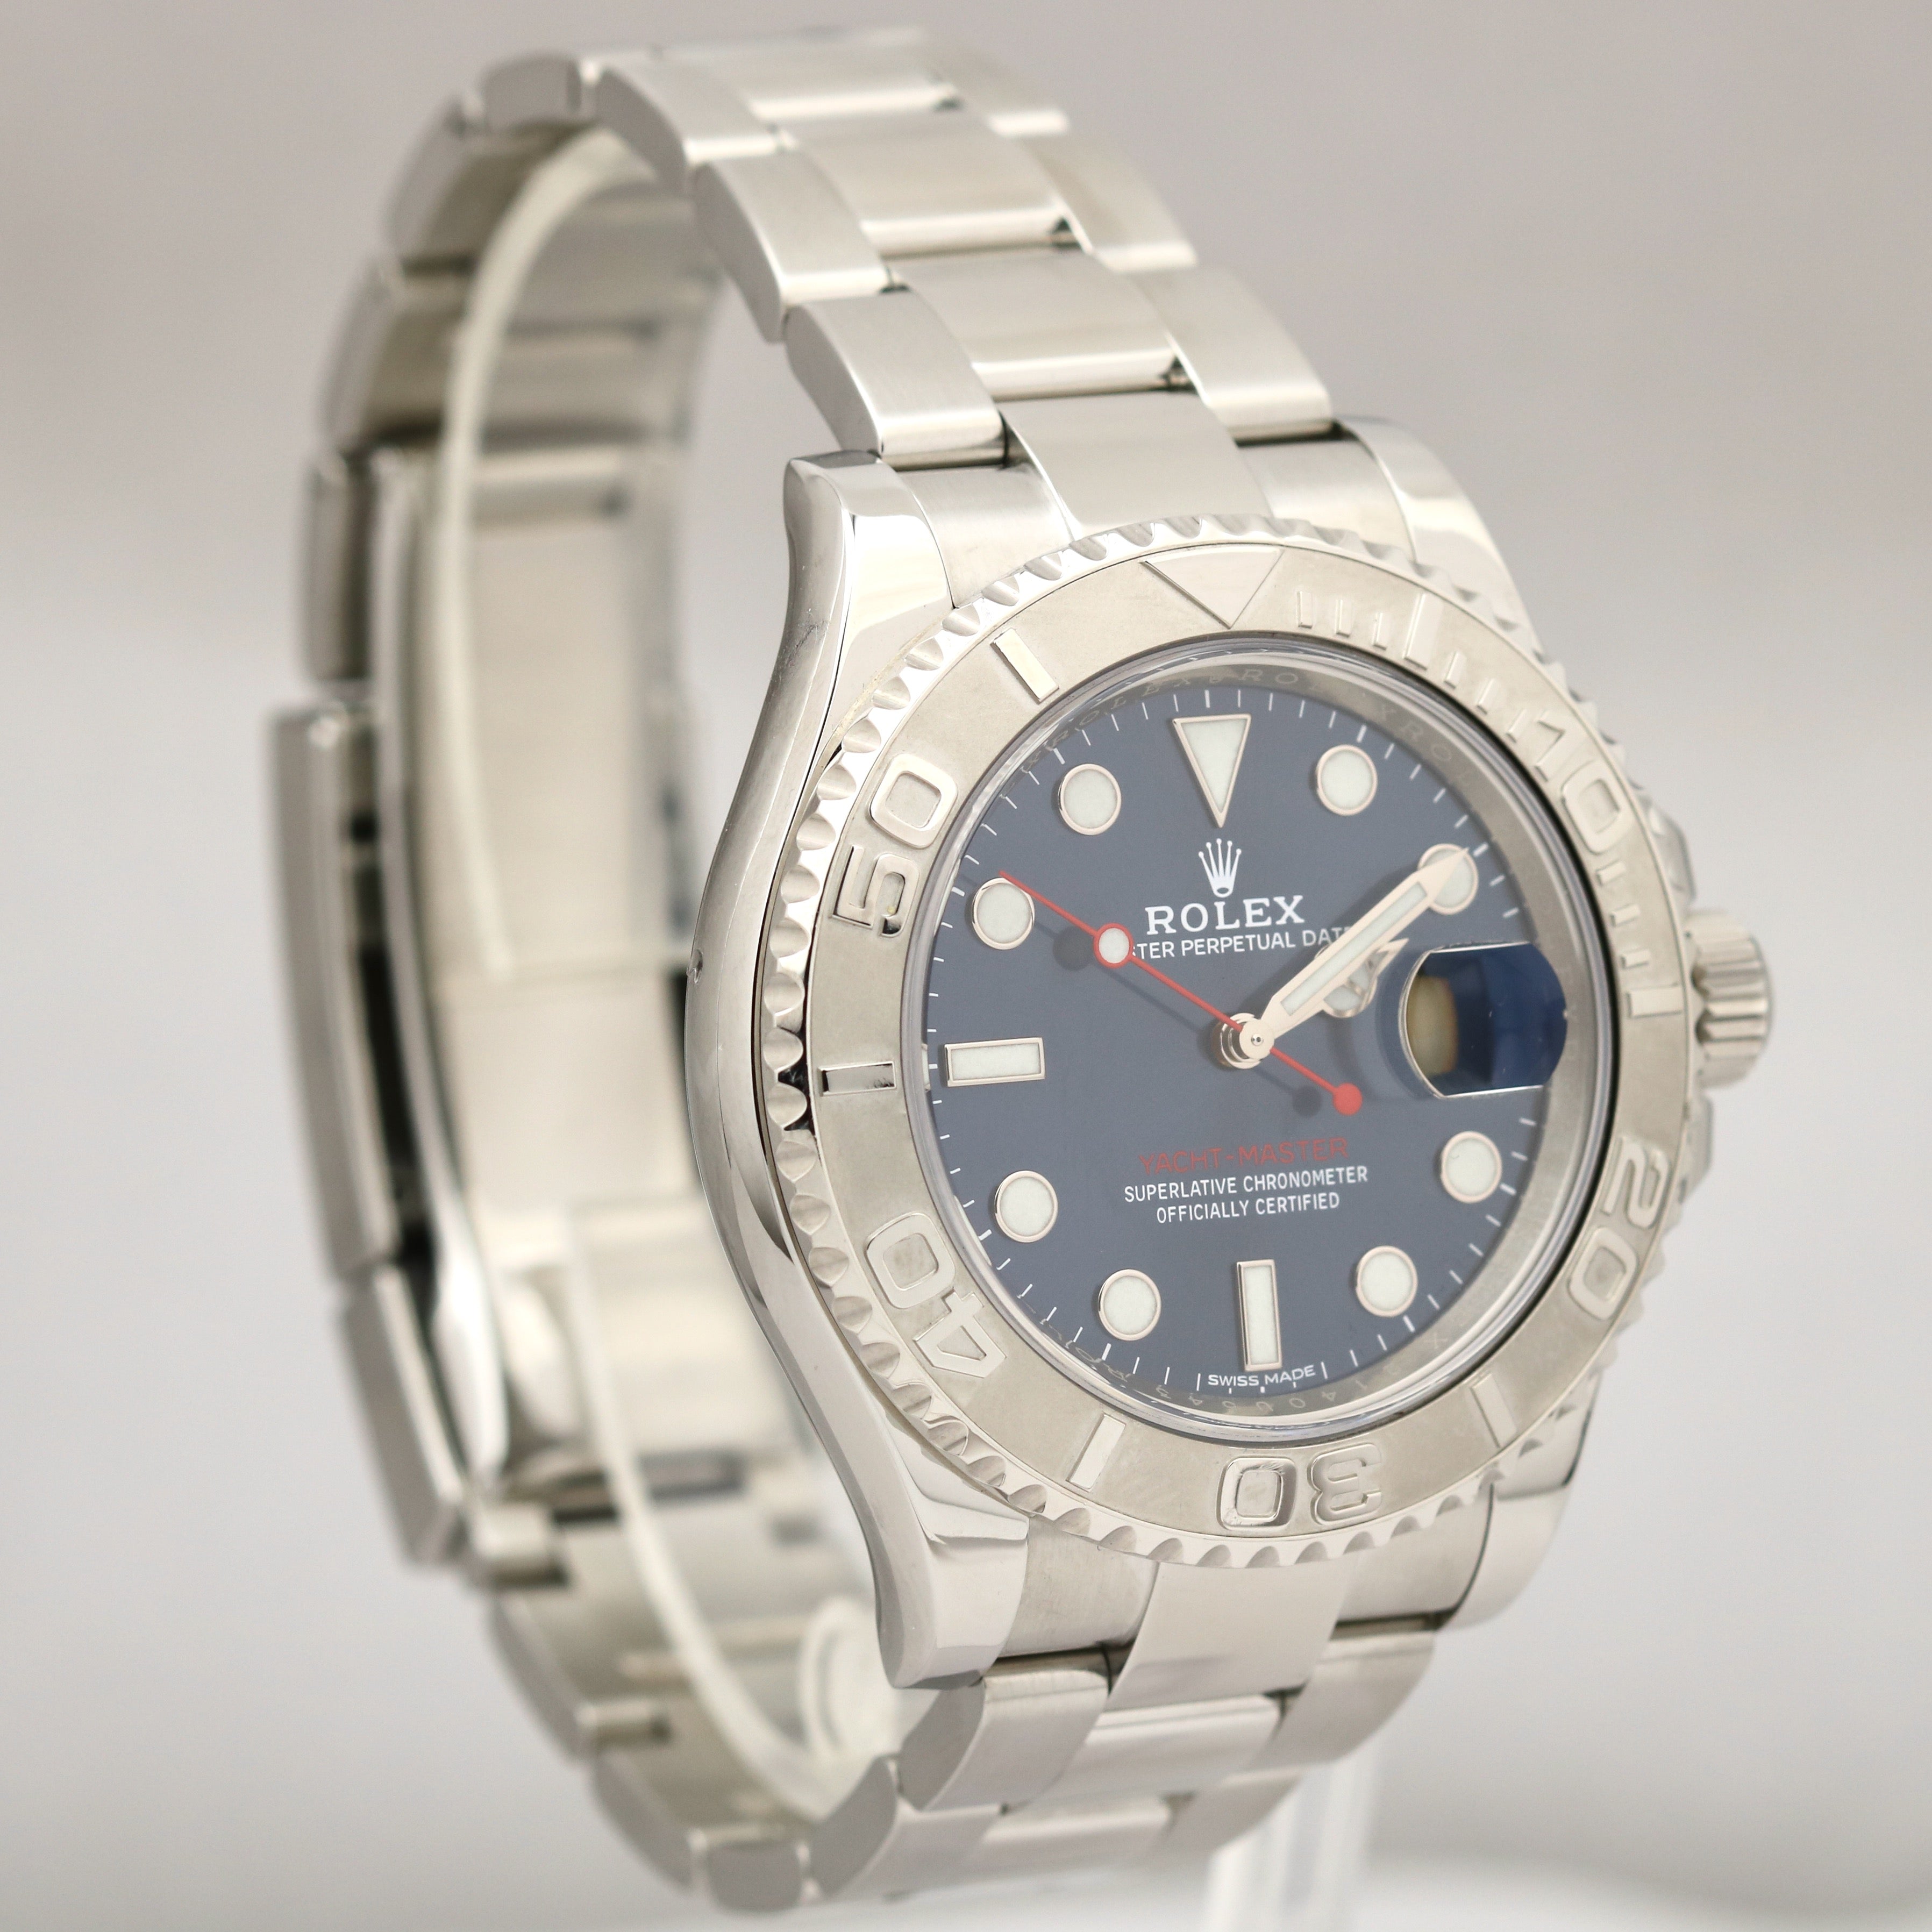 MINT PAPERS Rolex Yacht-Master Platinum BLUE 40mm Steel Oyster Watch 116622 BOX